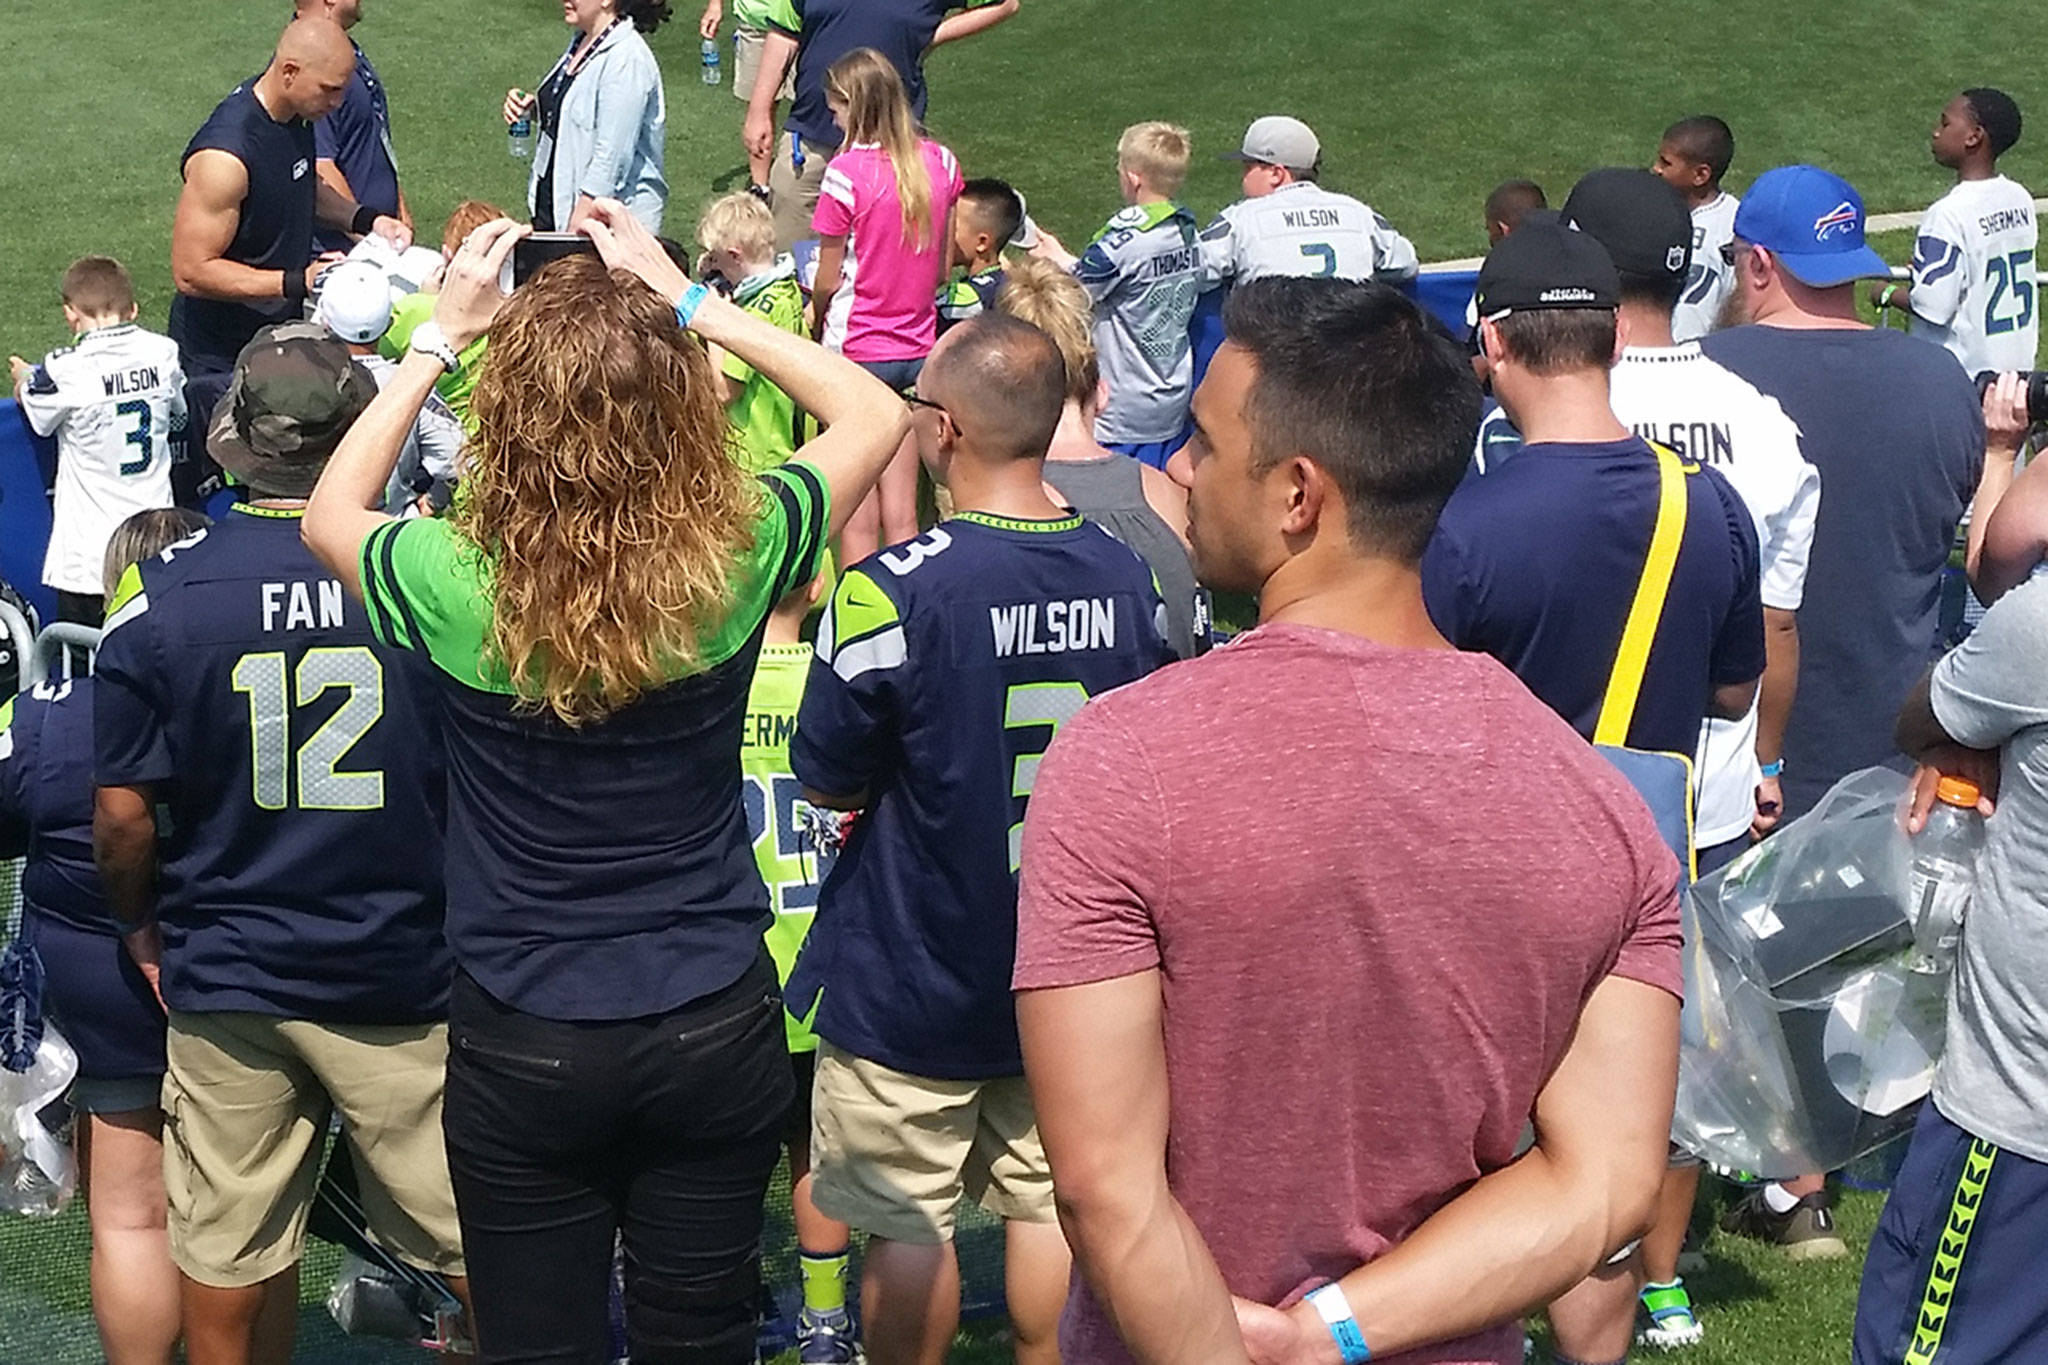 Dozens of fans gather around Jimmy Graham, upper left, as he signs autographs after the training camp practice.